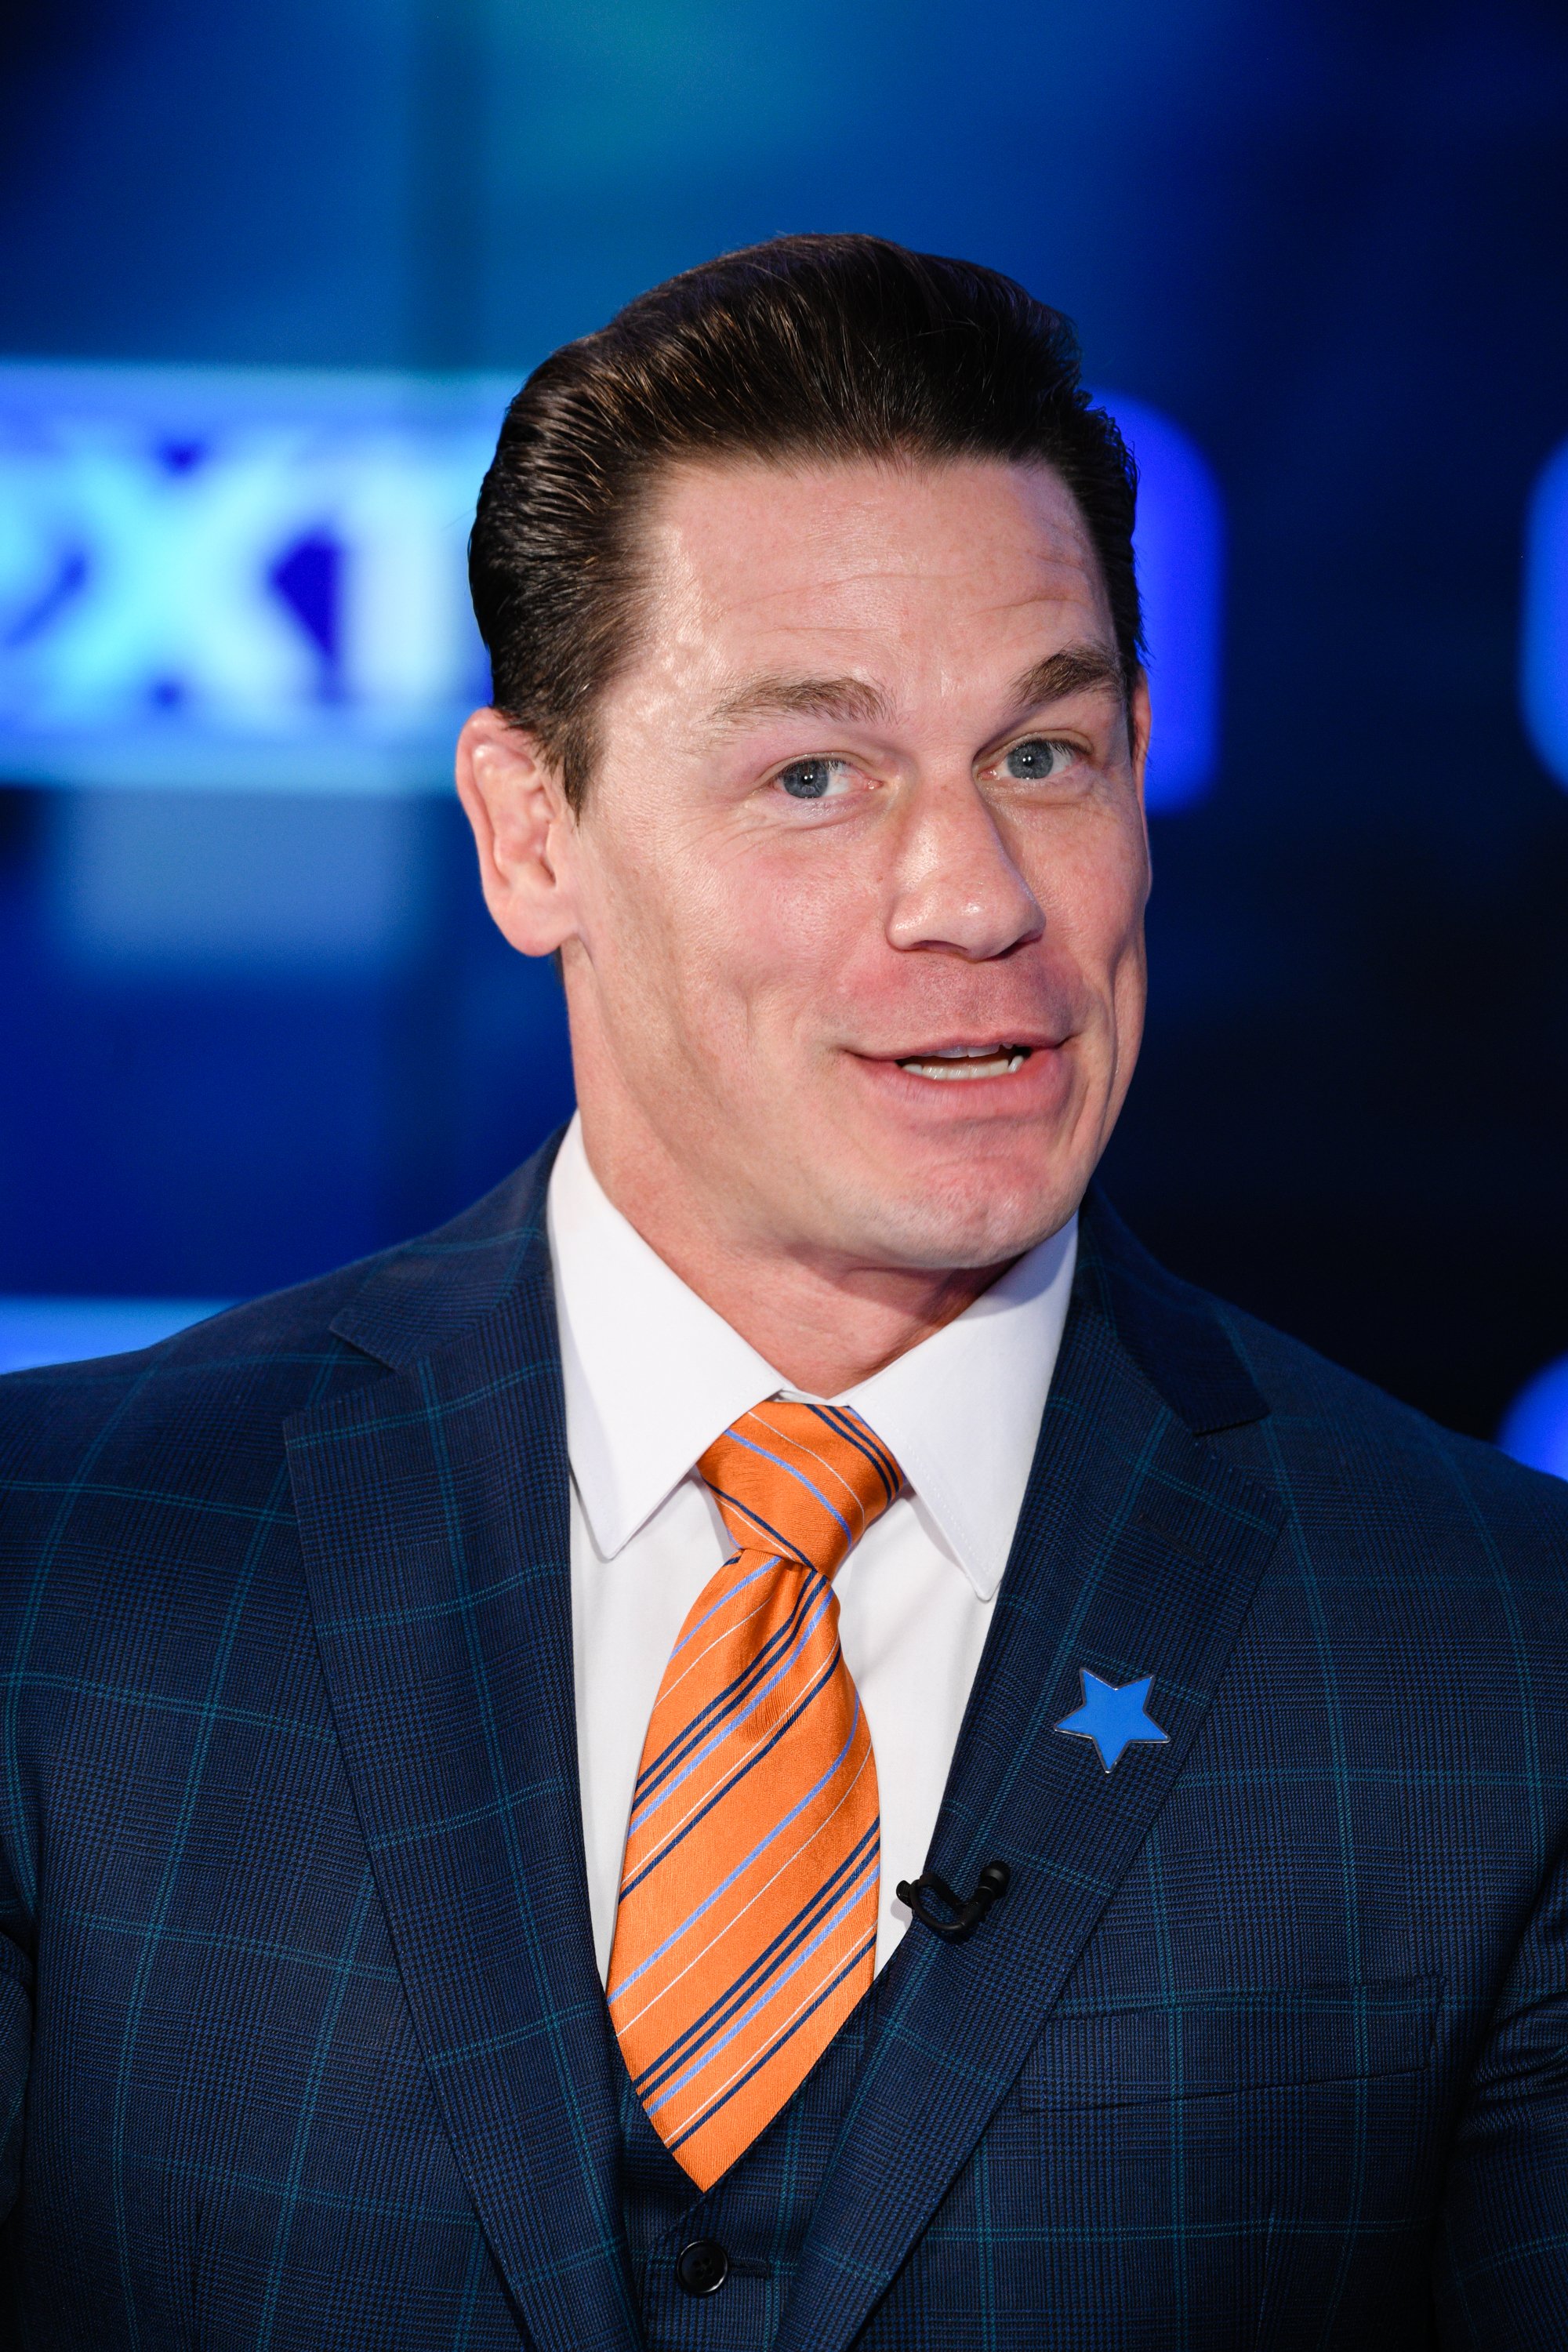 John Cena on "Extra" on January 15, 2020, in California. | Source: Getty Images